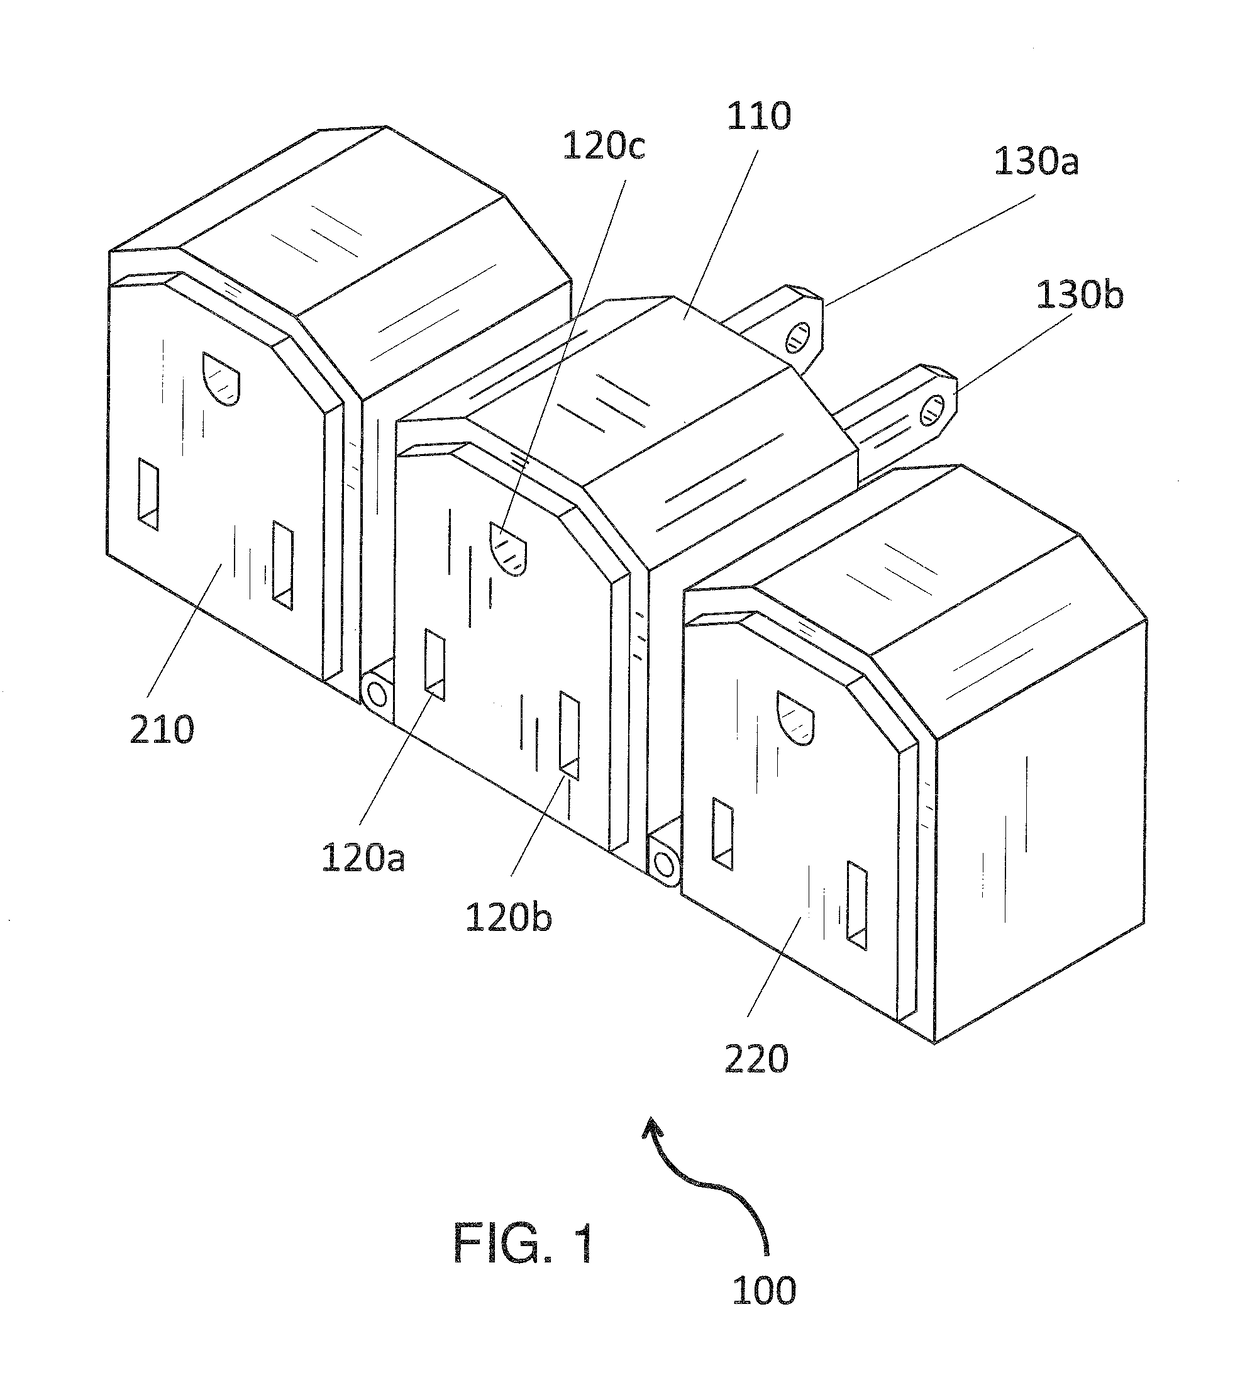 Electrical outlet adaptor device